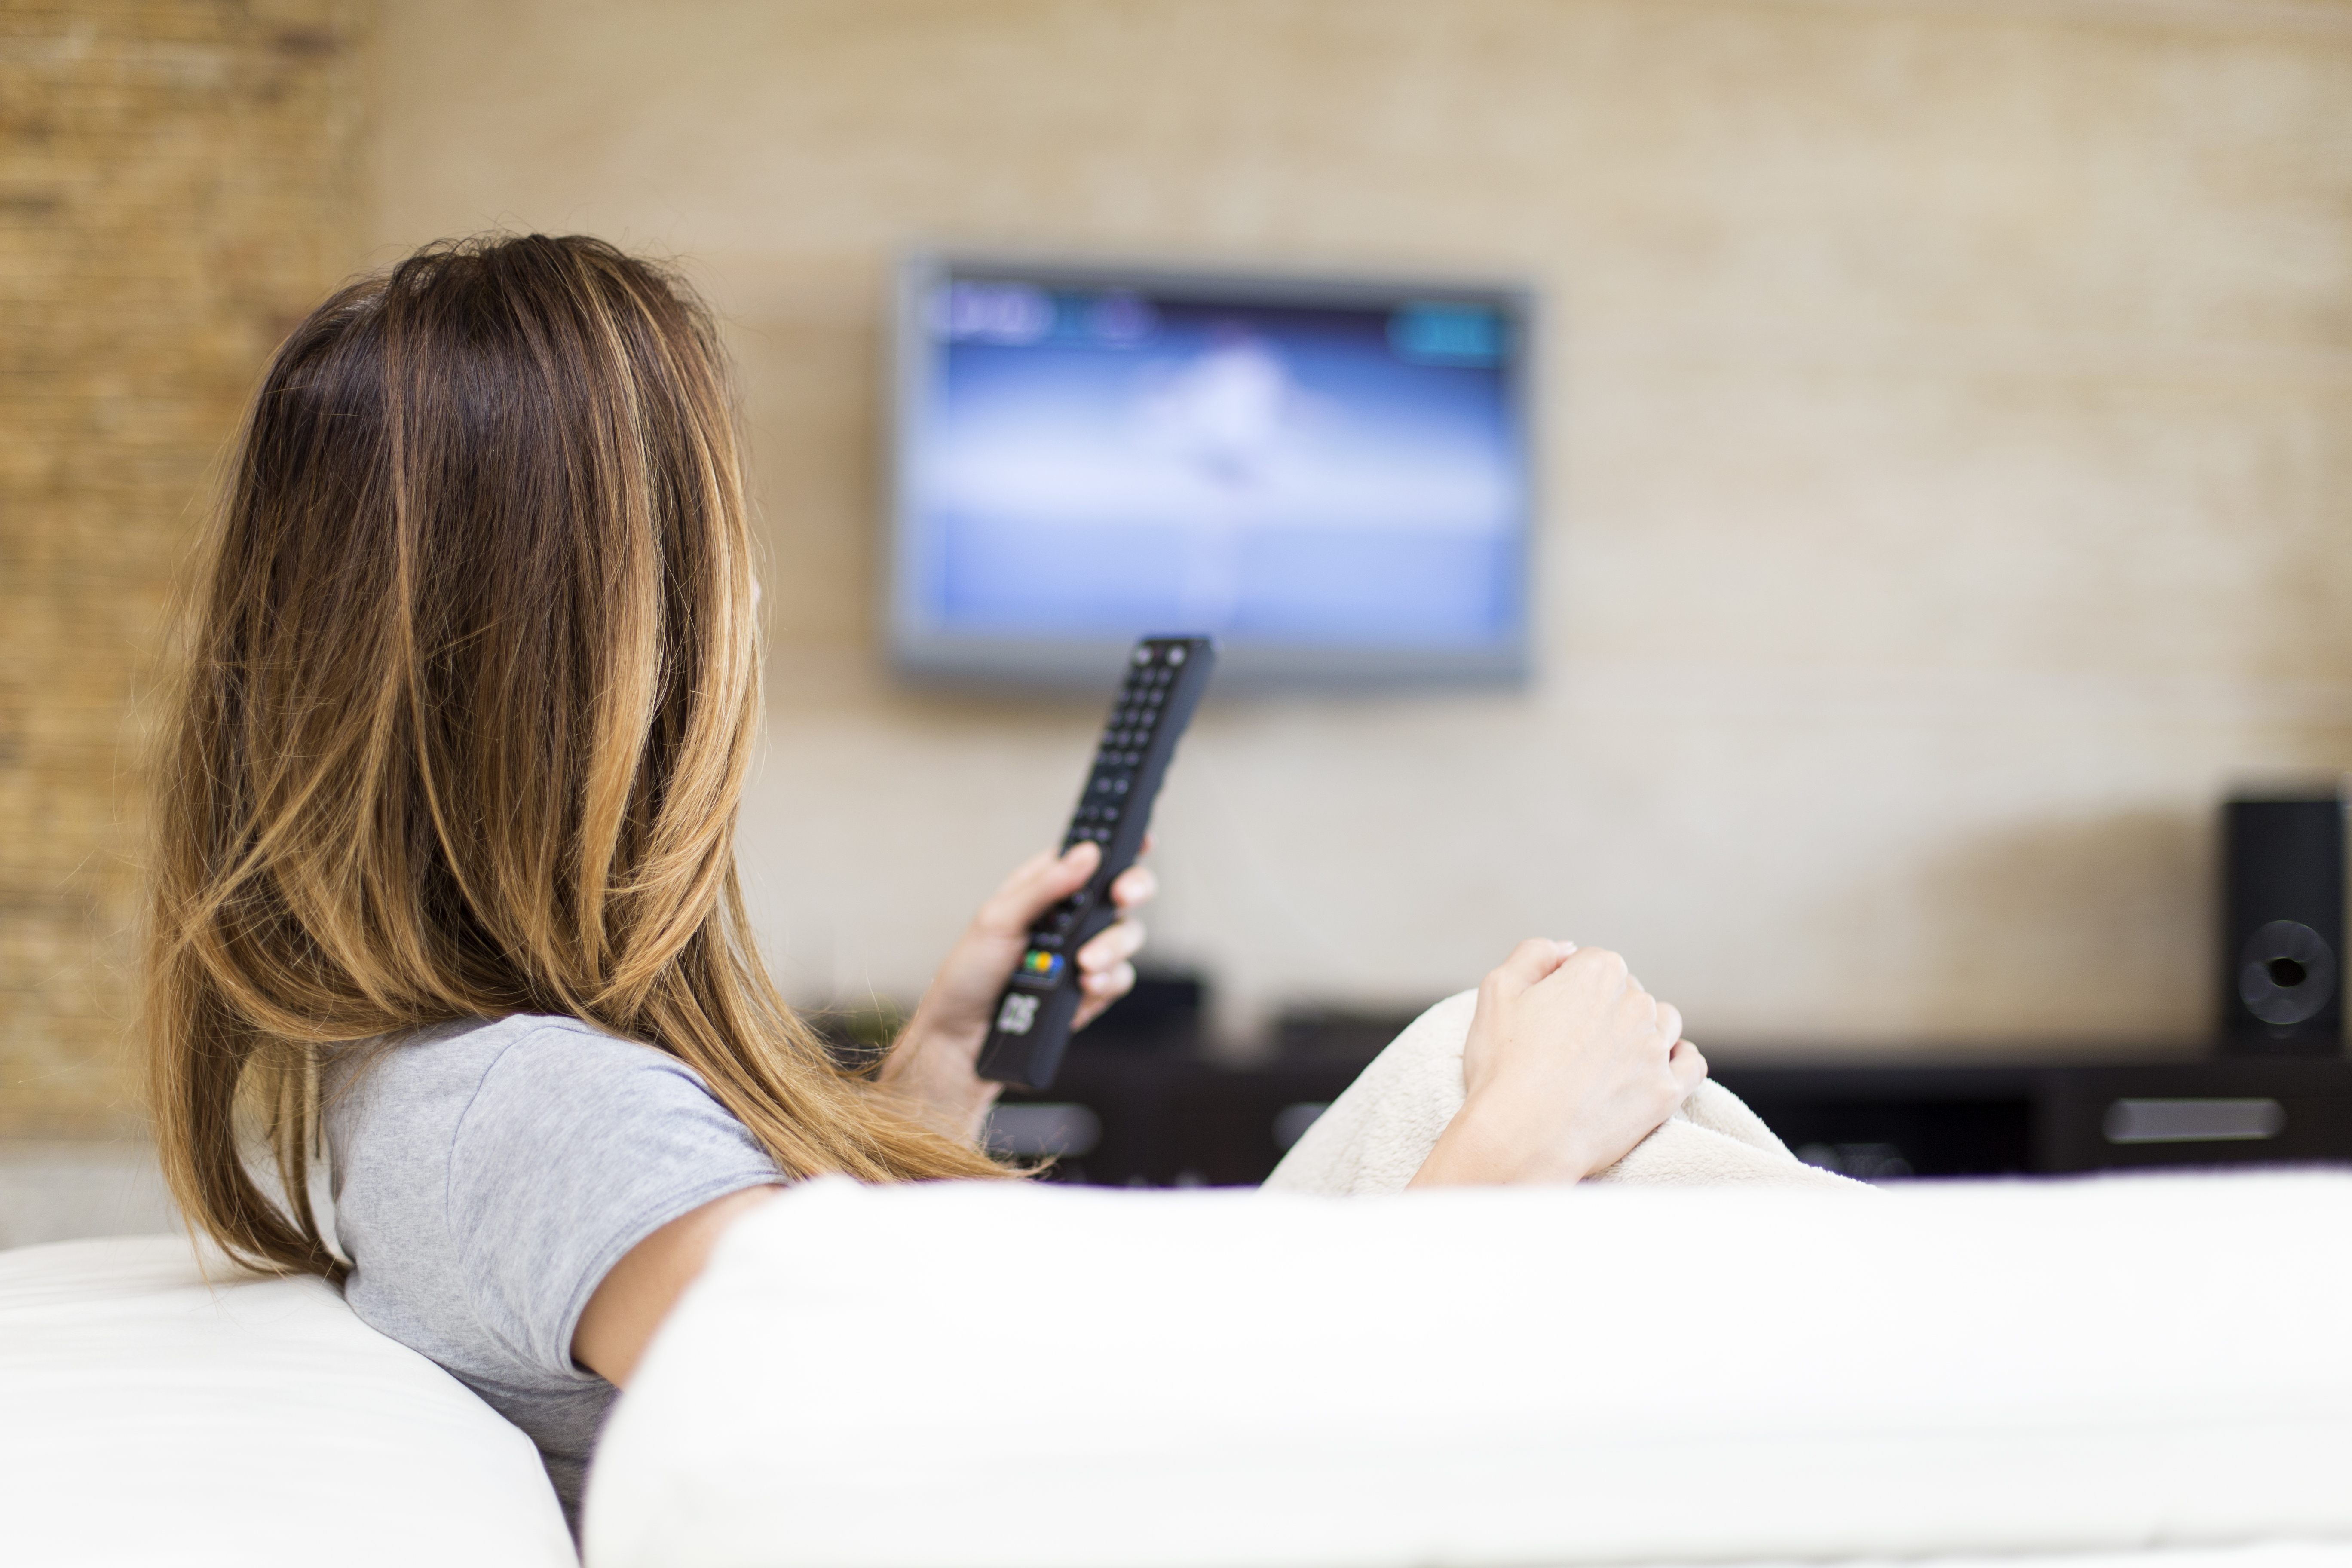 A woman watches television. Shutterstock image via Goran Bogicevic